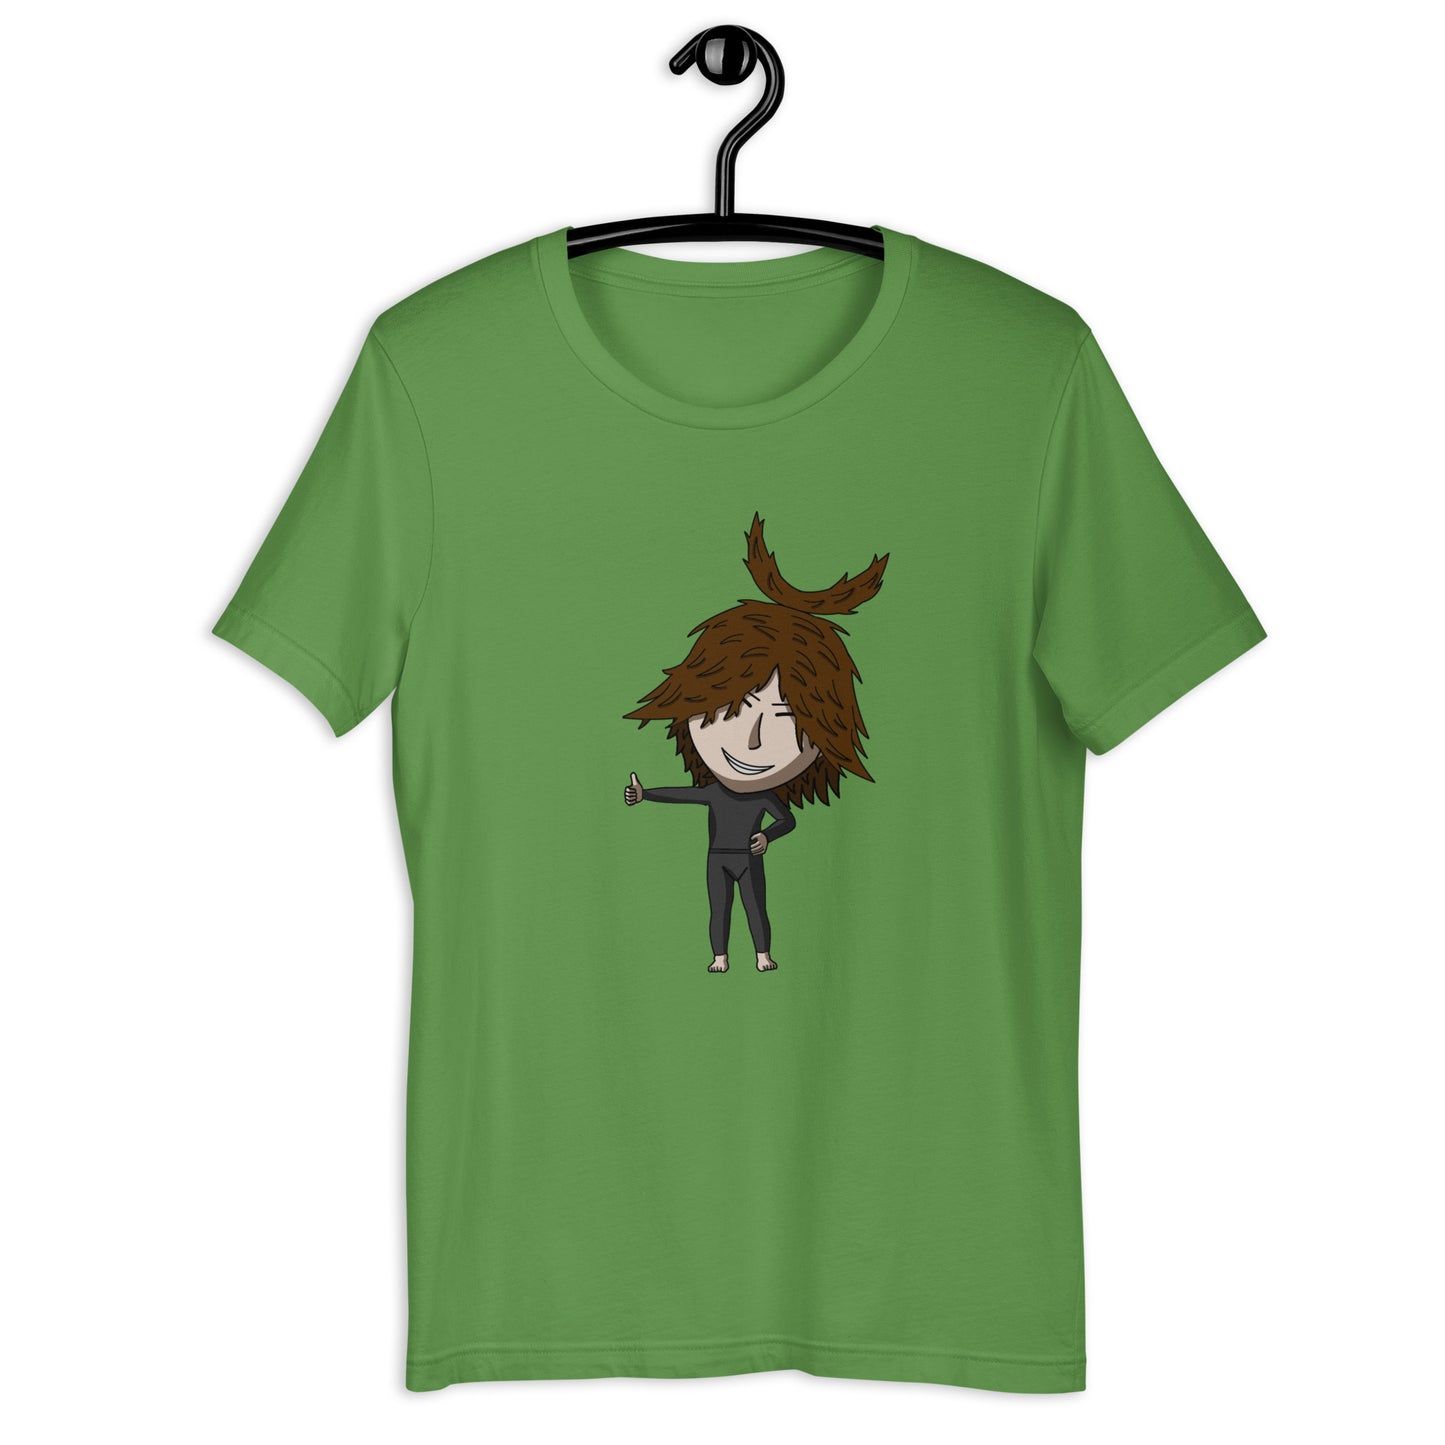 Michael | Chibi character in anime style | T-shirt